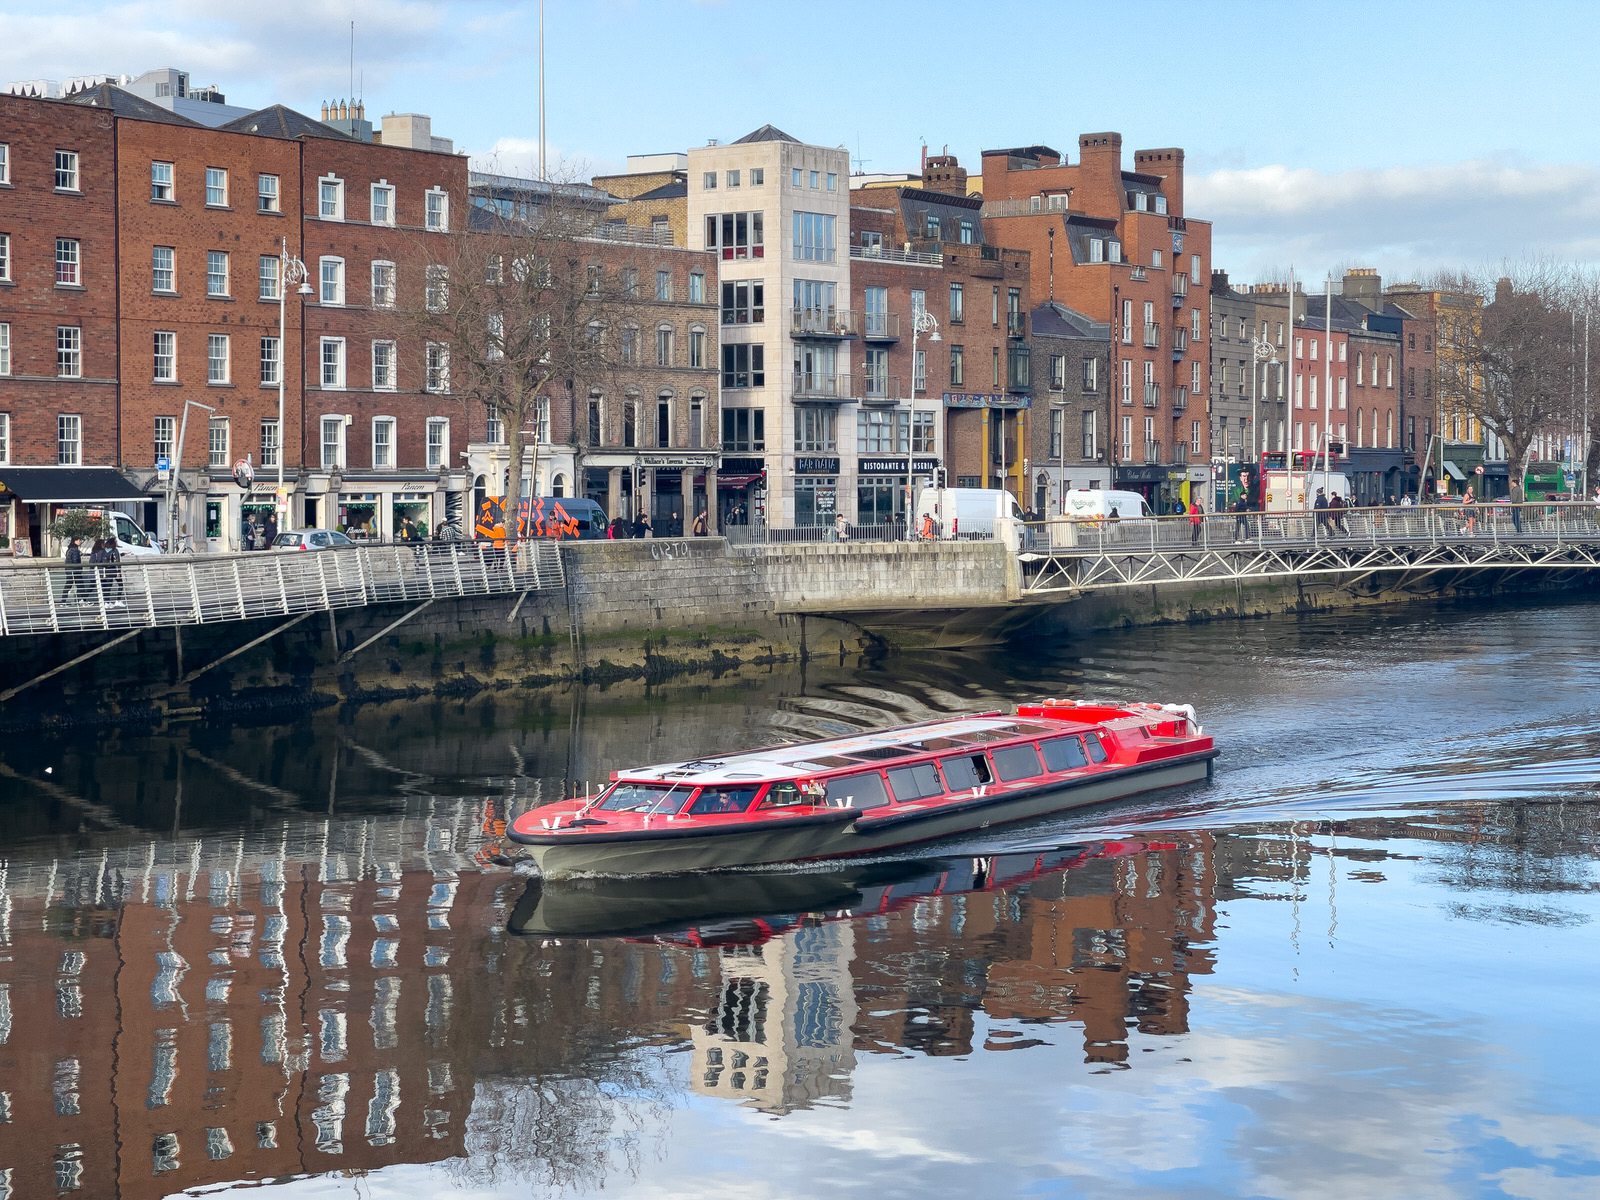 I HAD NOTHING BETTER TO DO [SO I PHOTOGRAPHED THE SPIRIT OF THE DOCKLANDS TURNING ON THE RIVER LIFFEY]-229439-1